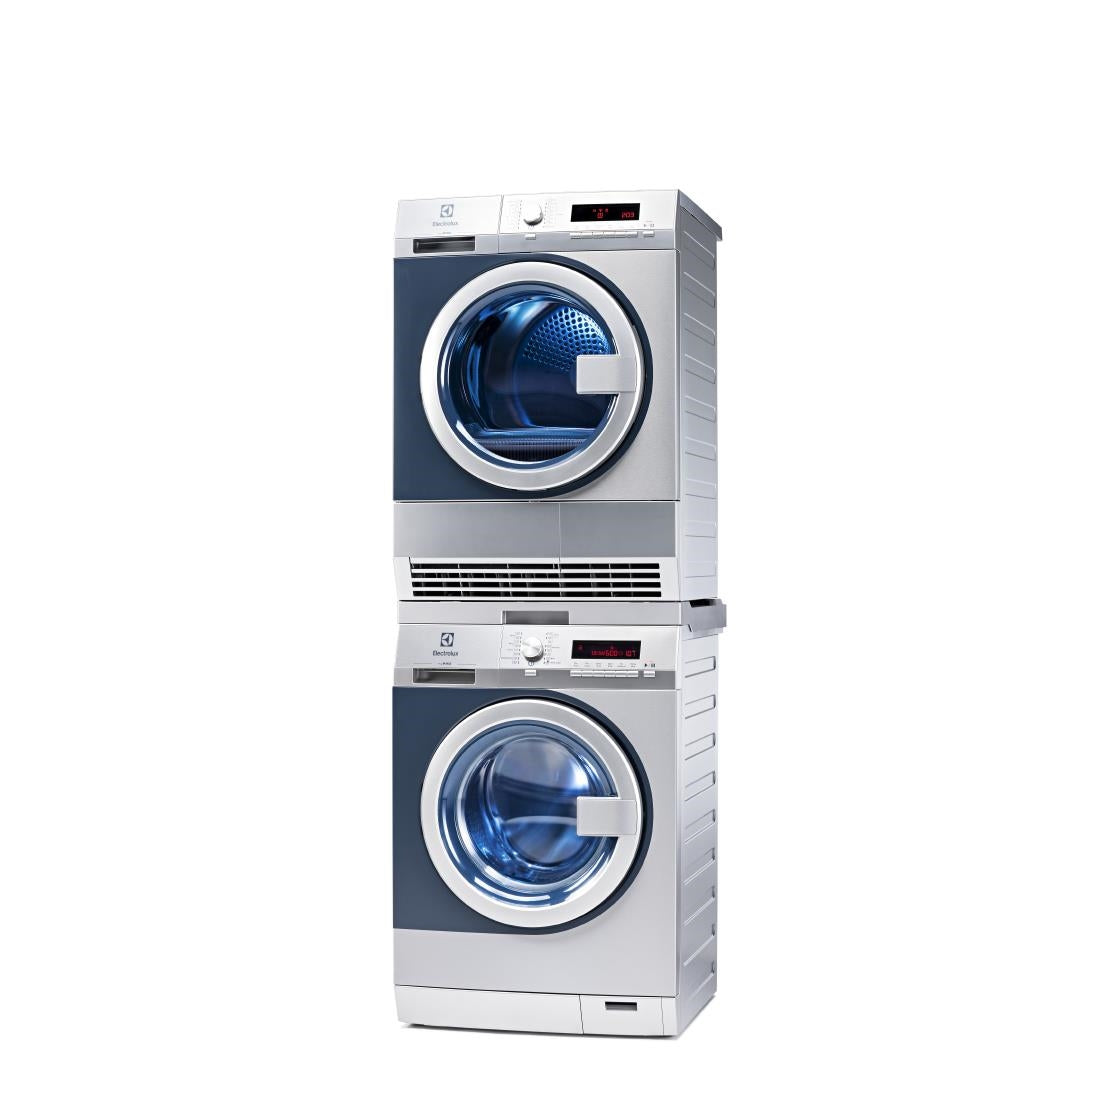 CK375 Electrolux myPRO Commercial Washing Machine WE170P With Pump